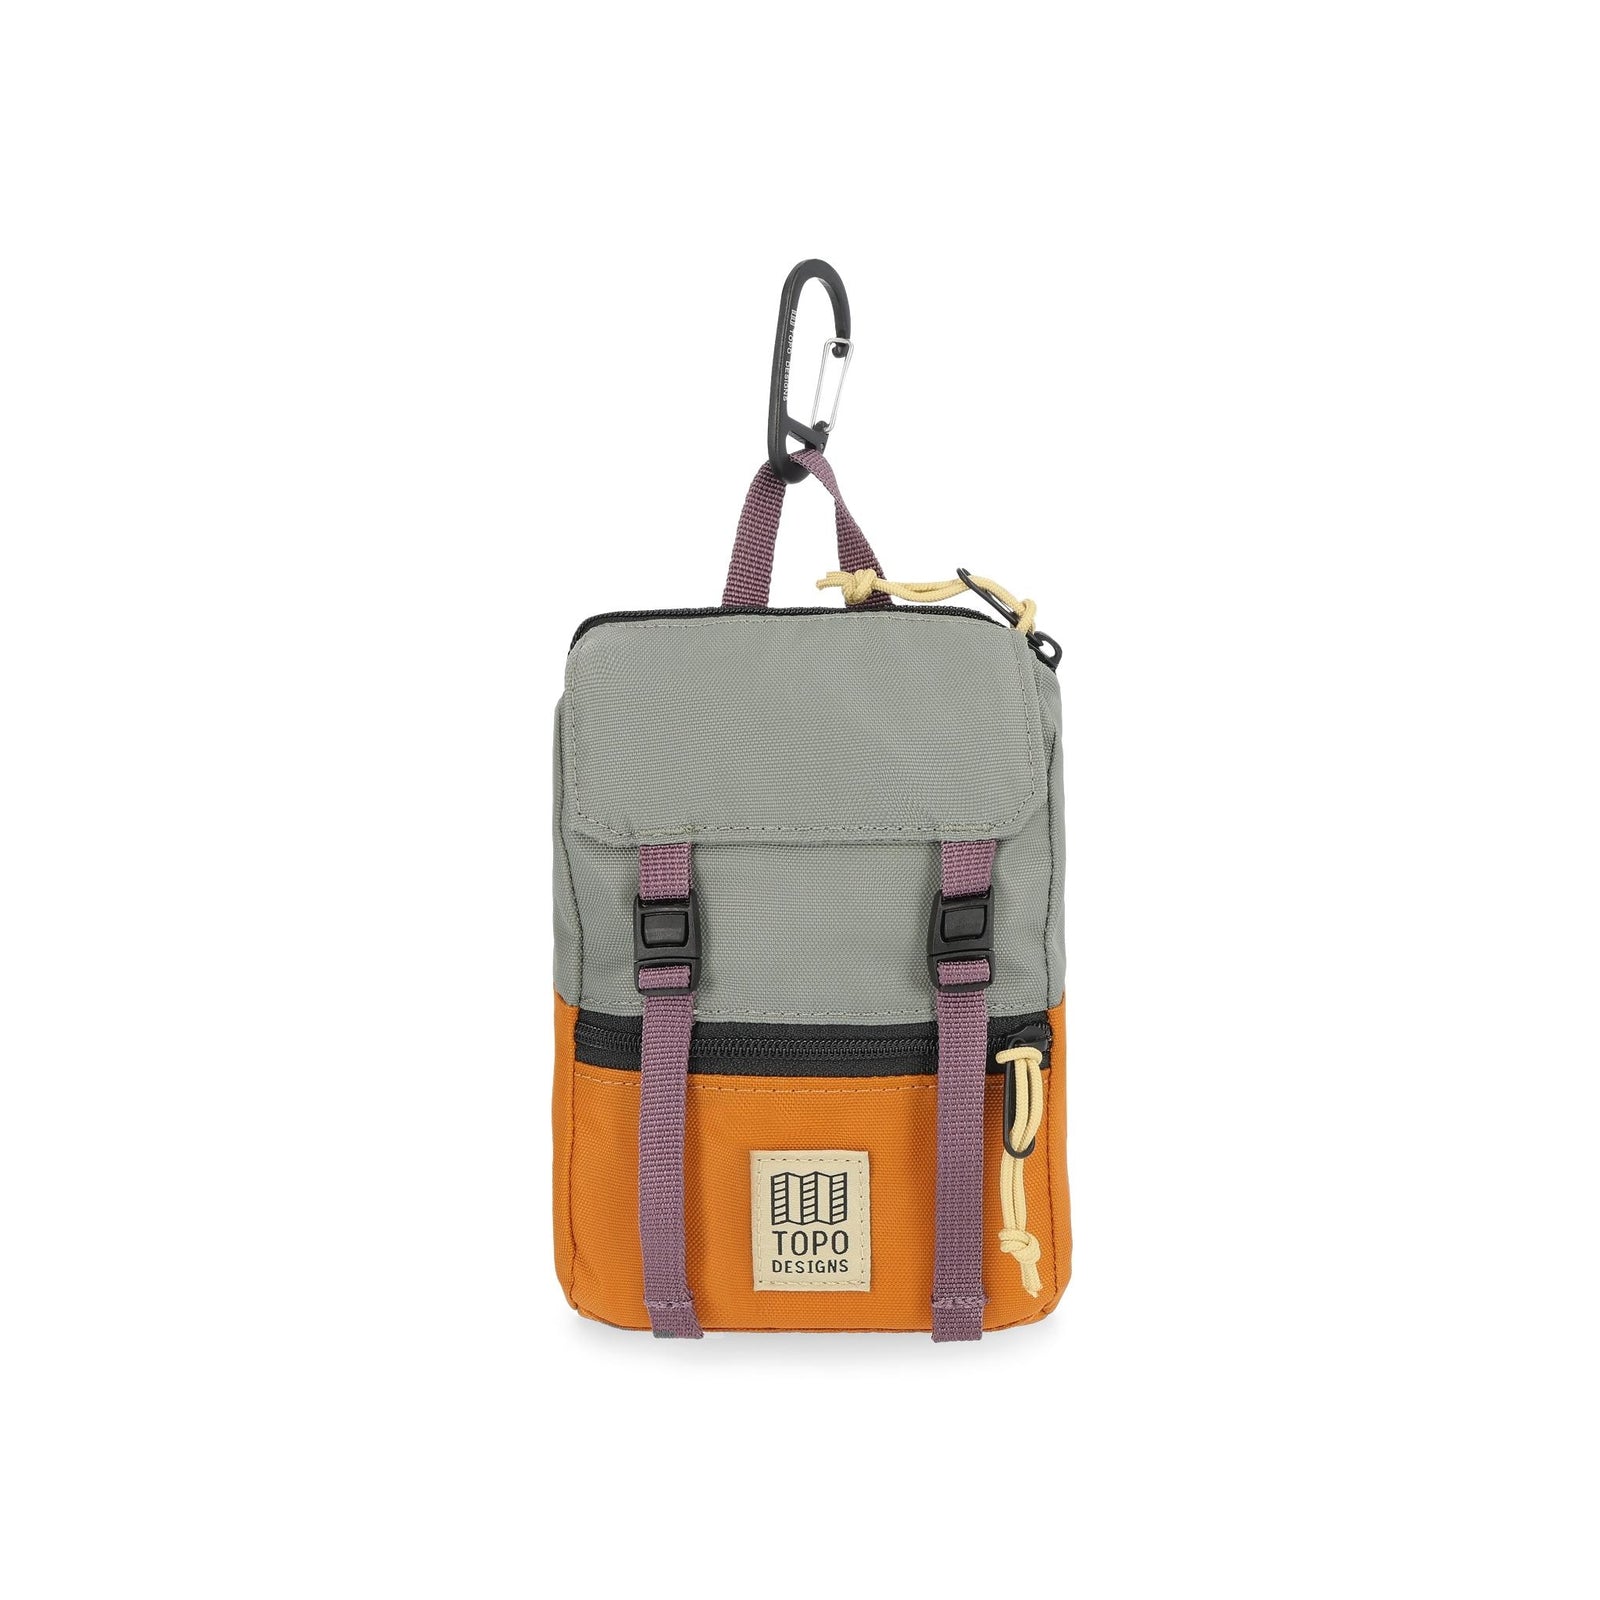 Front View of Topo Designs Rover Pack Micro in "Beetle / Spice"